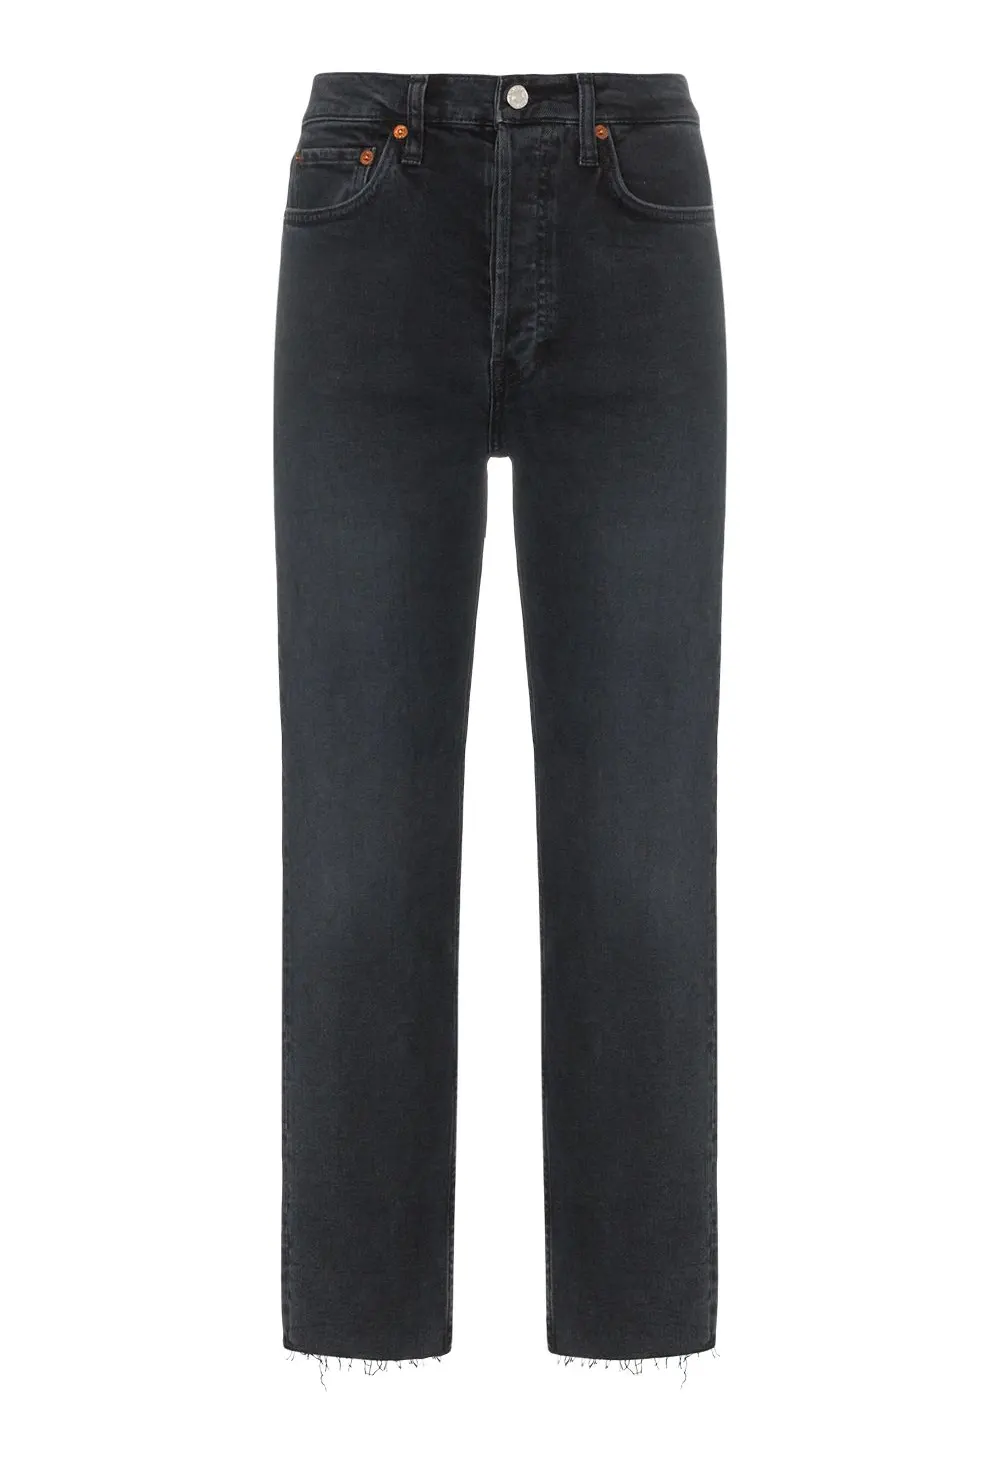 Stovepipe raw hem jeans, washed black